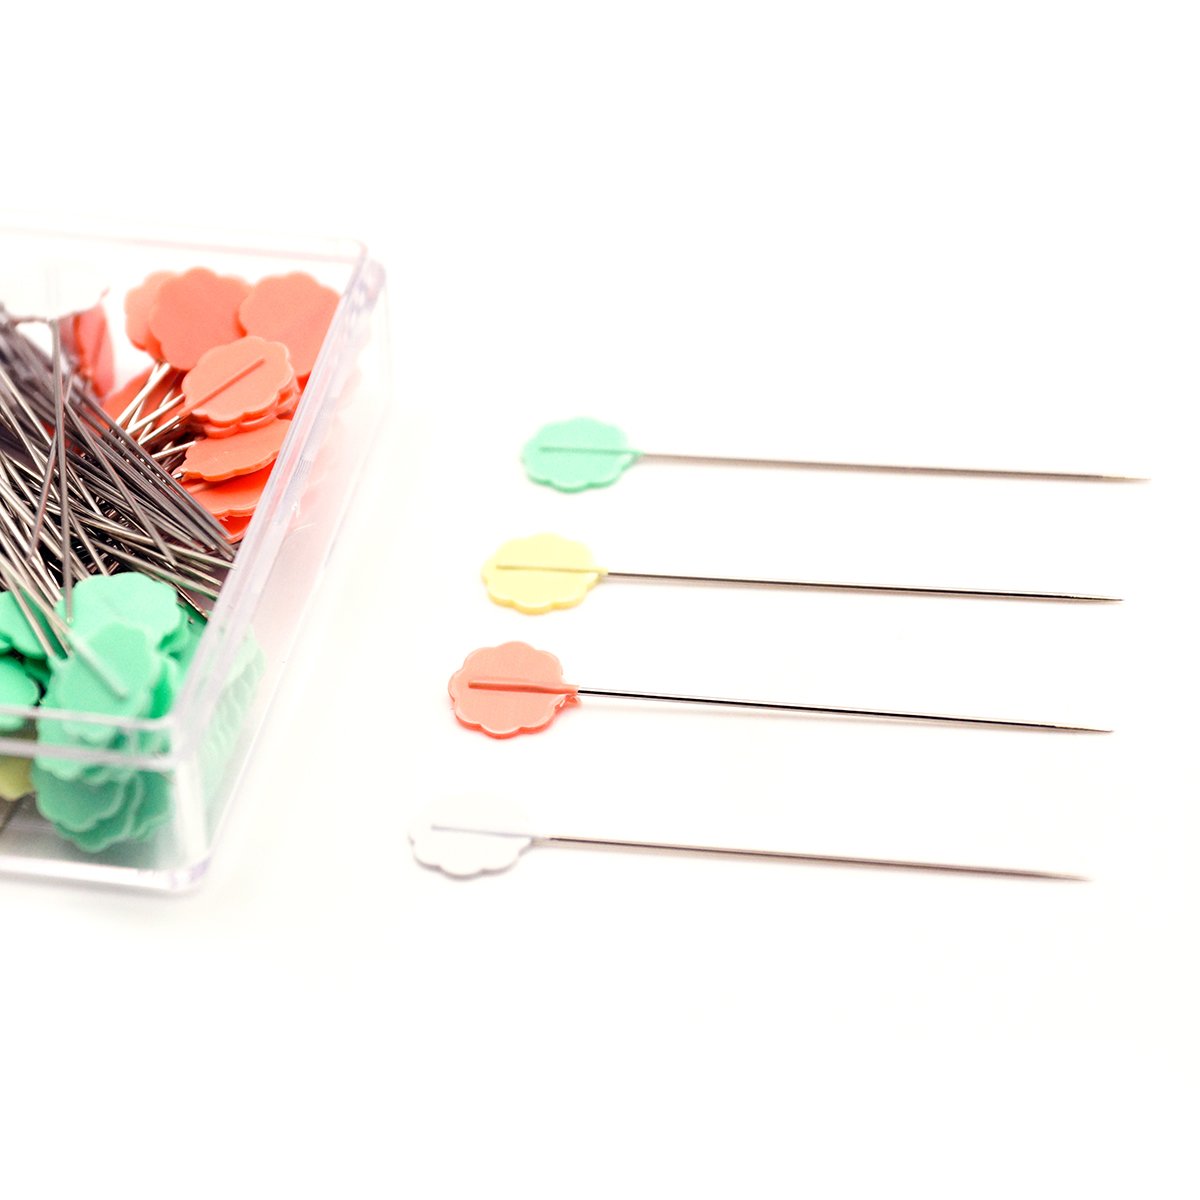 Flower Head Pins, Multi-Colored PASTELS 100 Count – The Singer